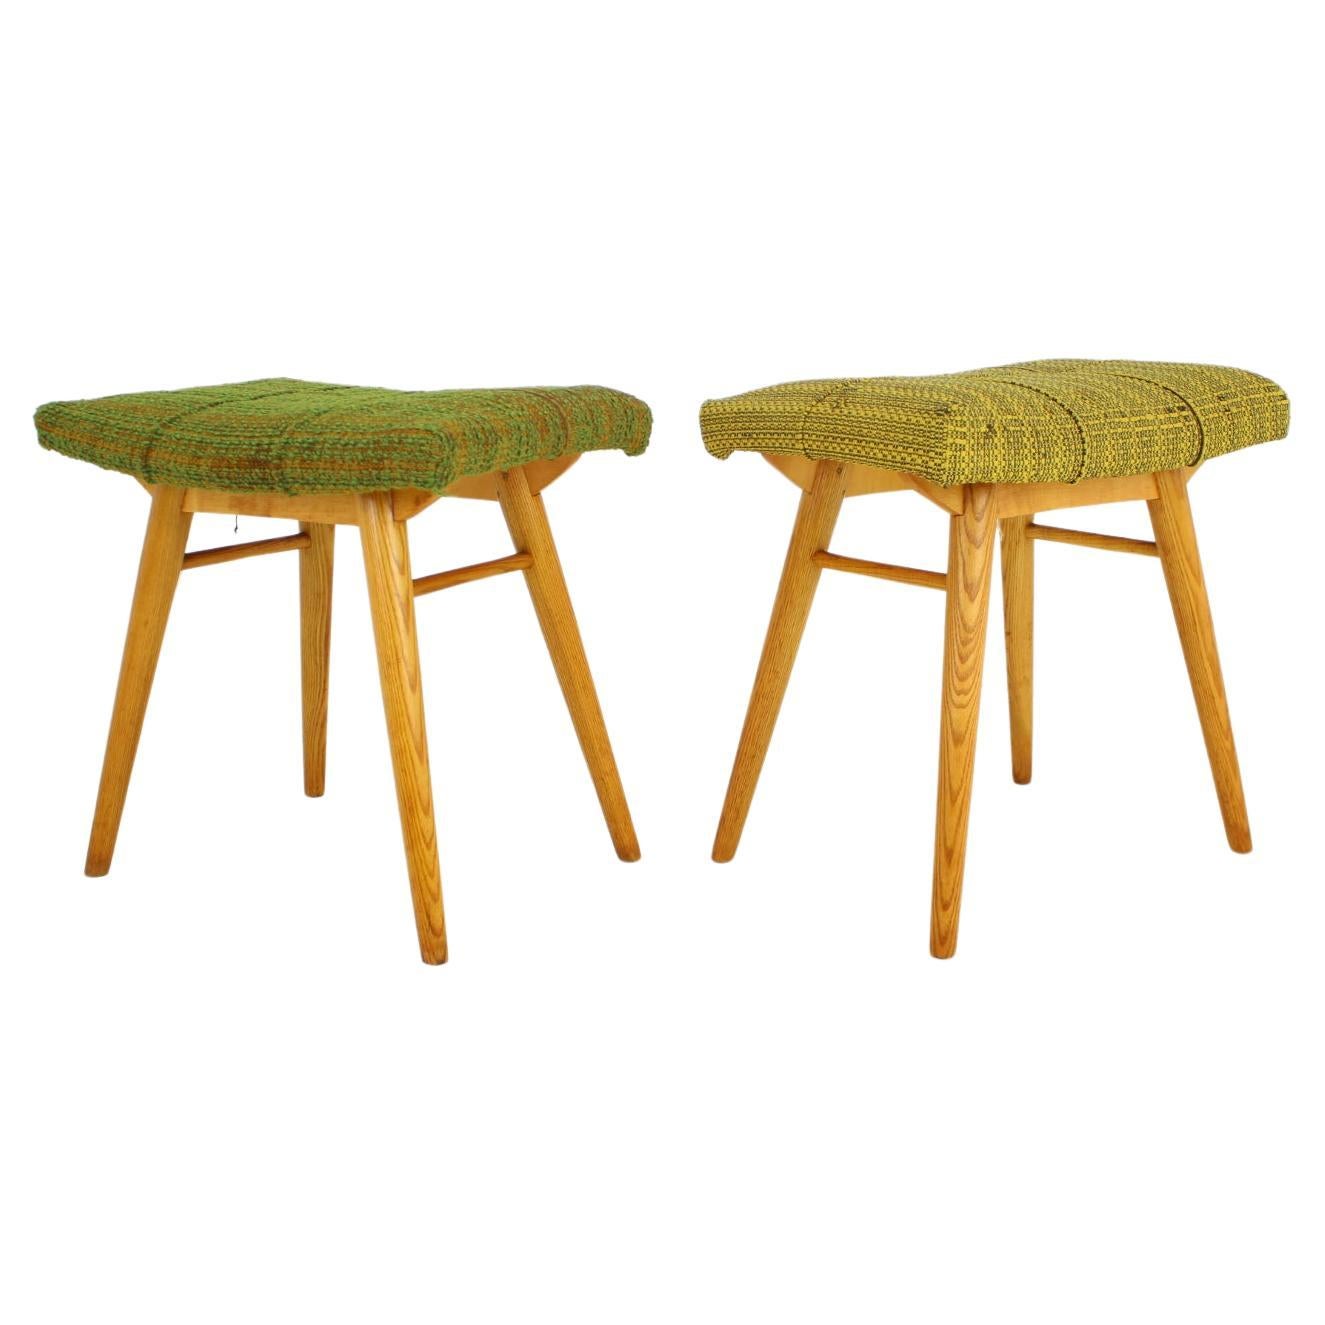 1960s Pair of Wooden Stools, Czechoslovakia For Sale